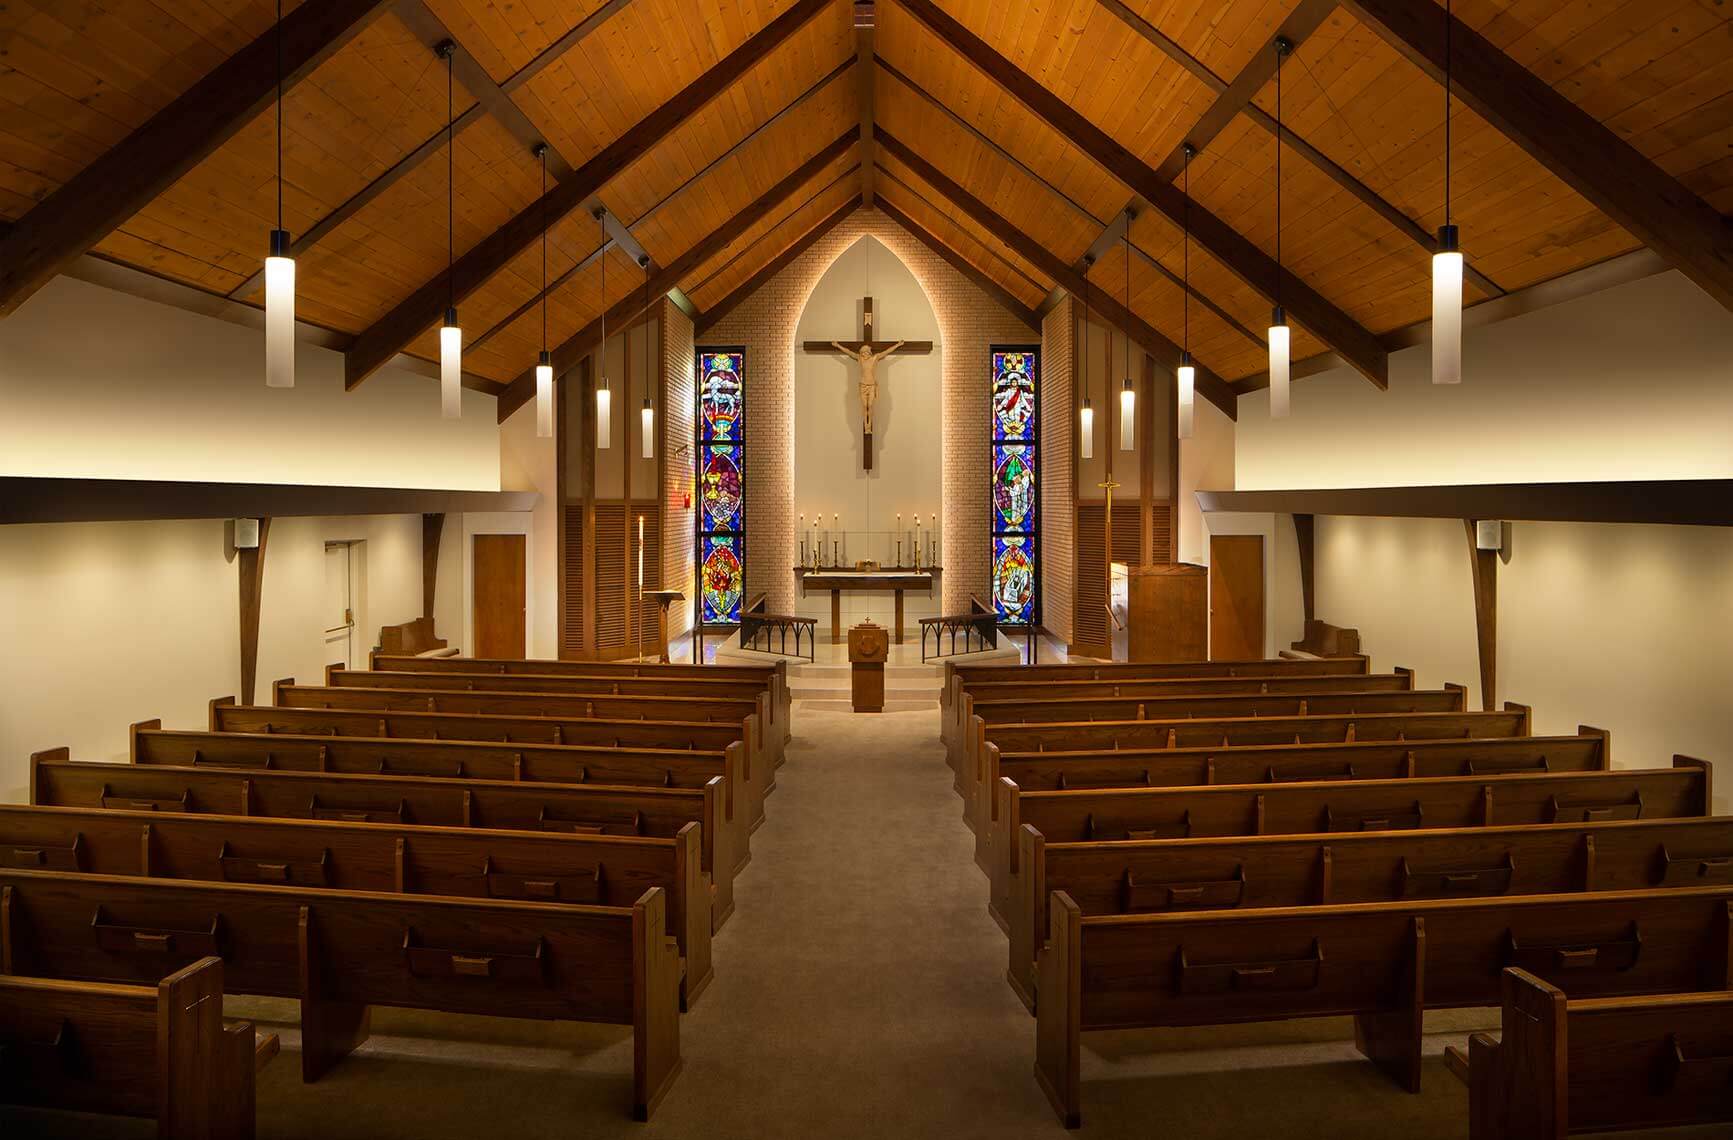 A head-on view from the rear of the sanctuary of the Lutheran Church in Bellevue, Tennessee